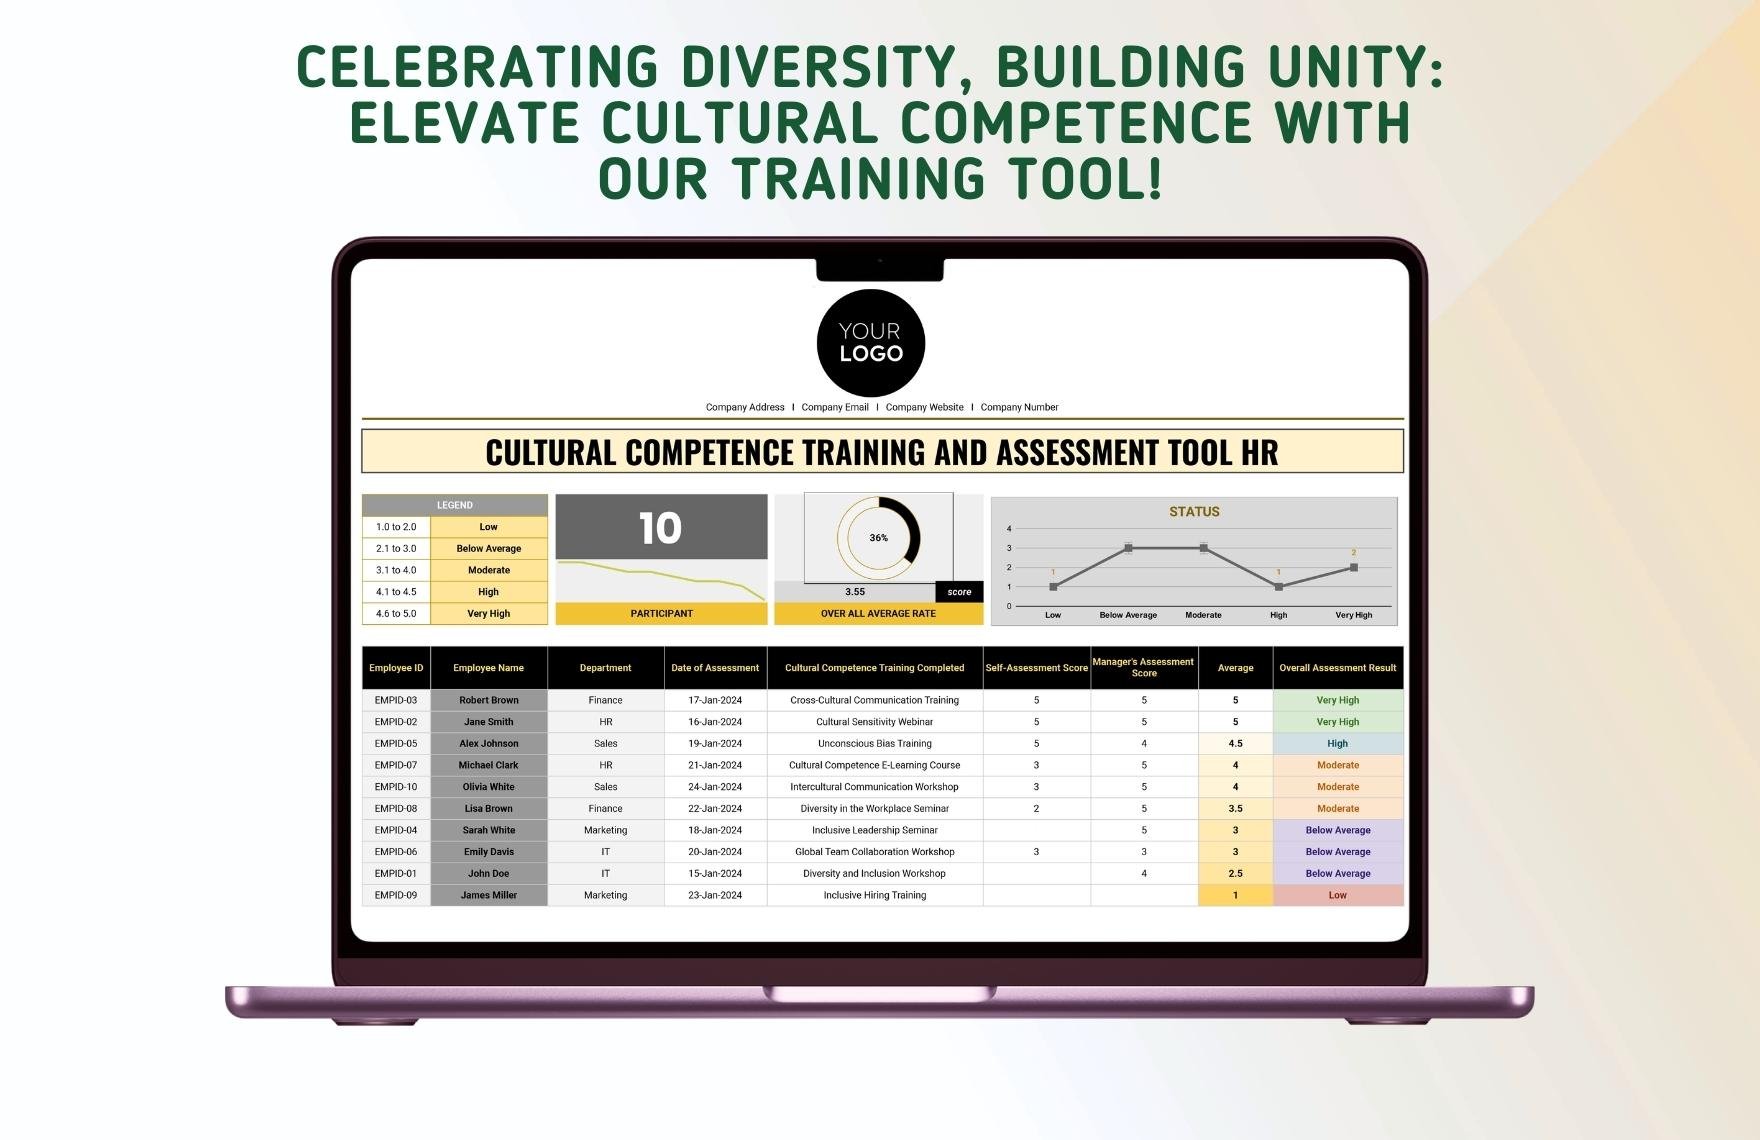 Cultural Competence Training and Assessment Tool HR Template